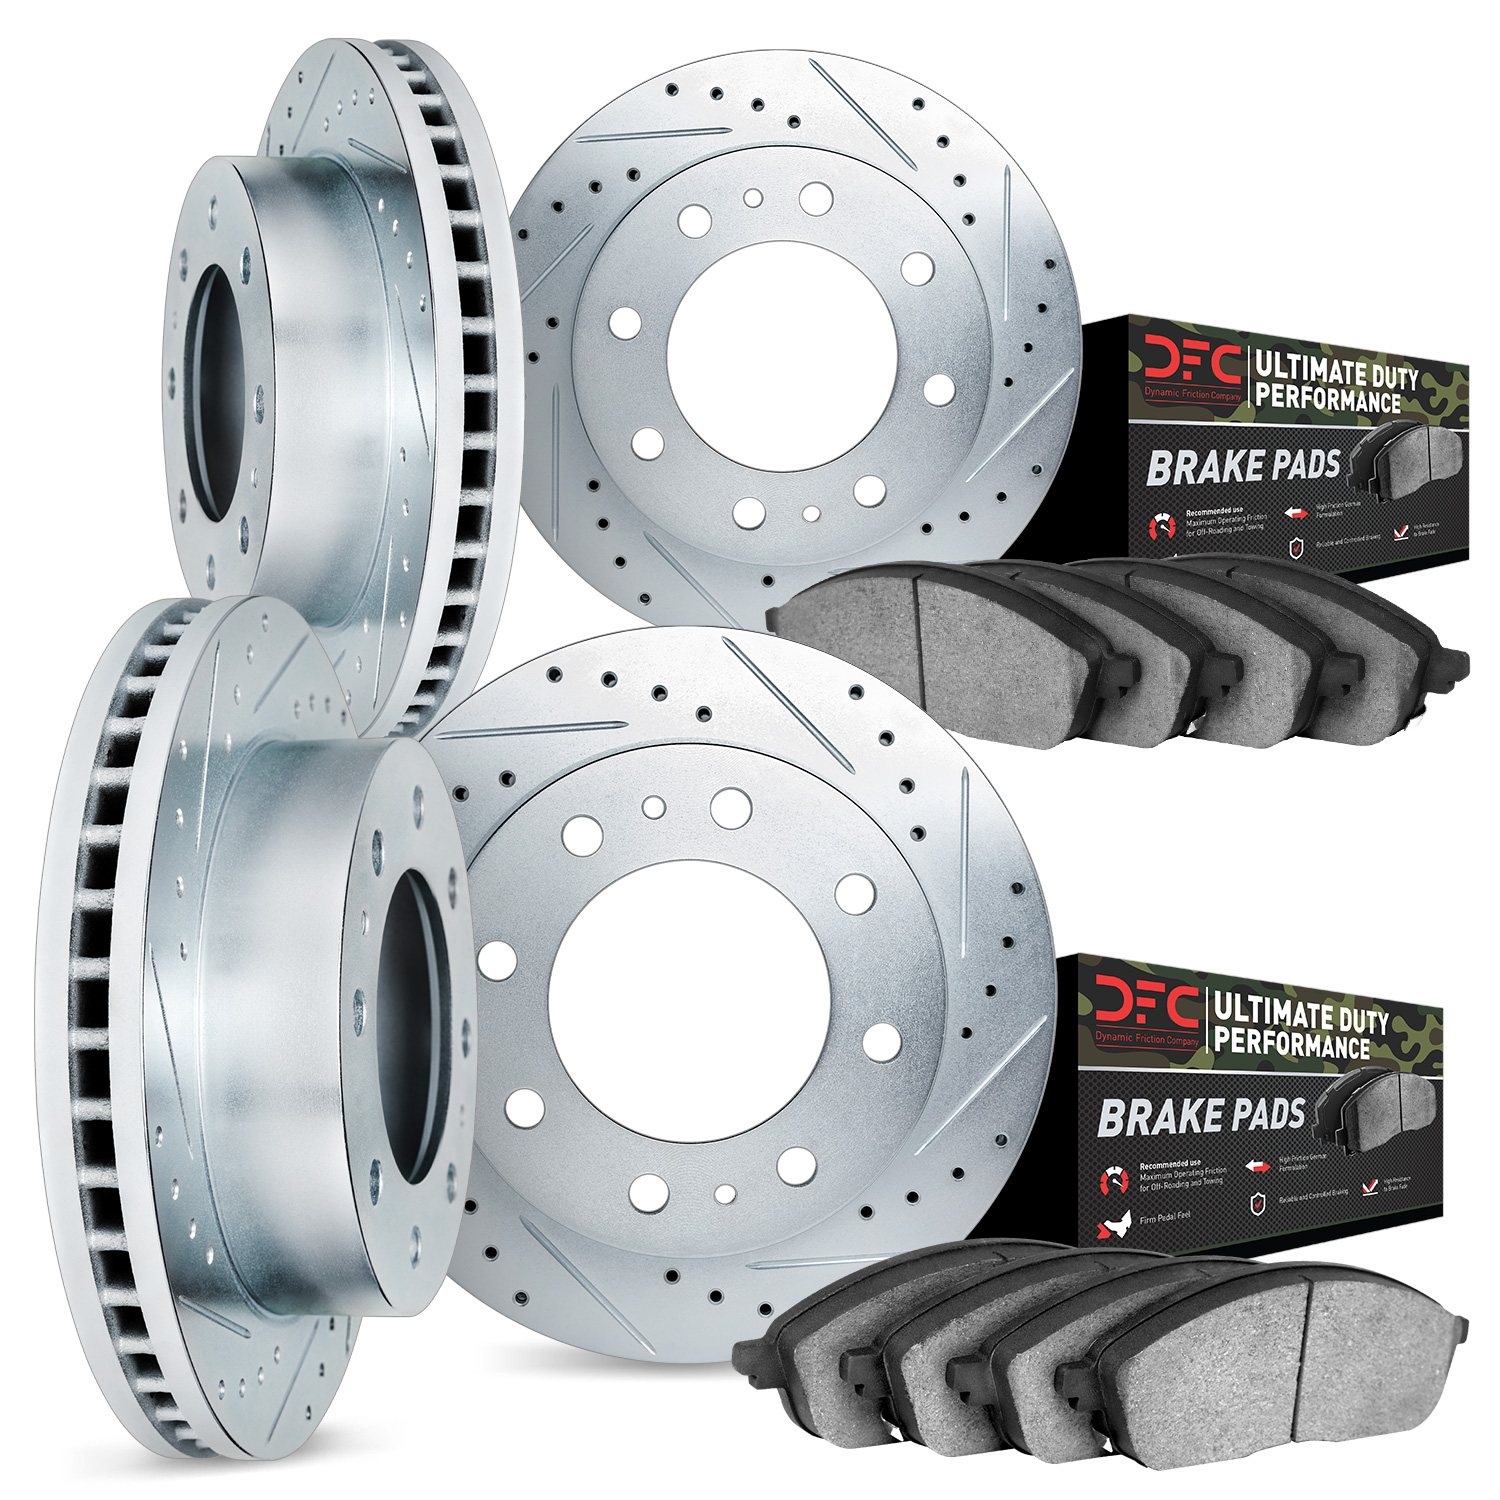 7404-54054 Drilled/Slotted Brake Rotors with Ultimate-Duty Brake Pads Kit [Silver], Fits Select Ford/Lincoln/Mercury/Mazda, Posi